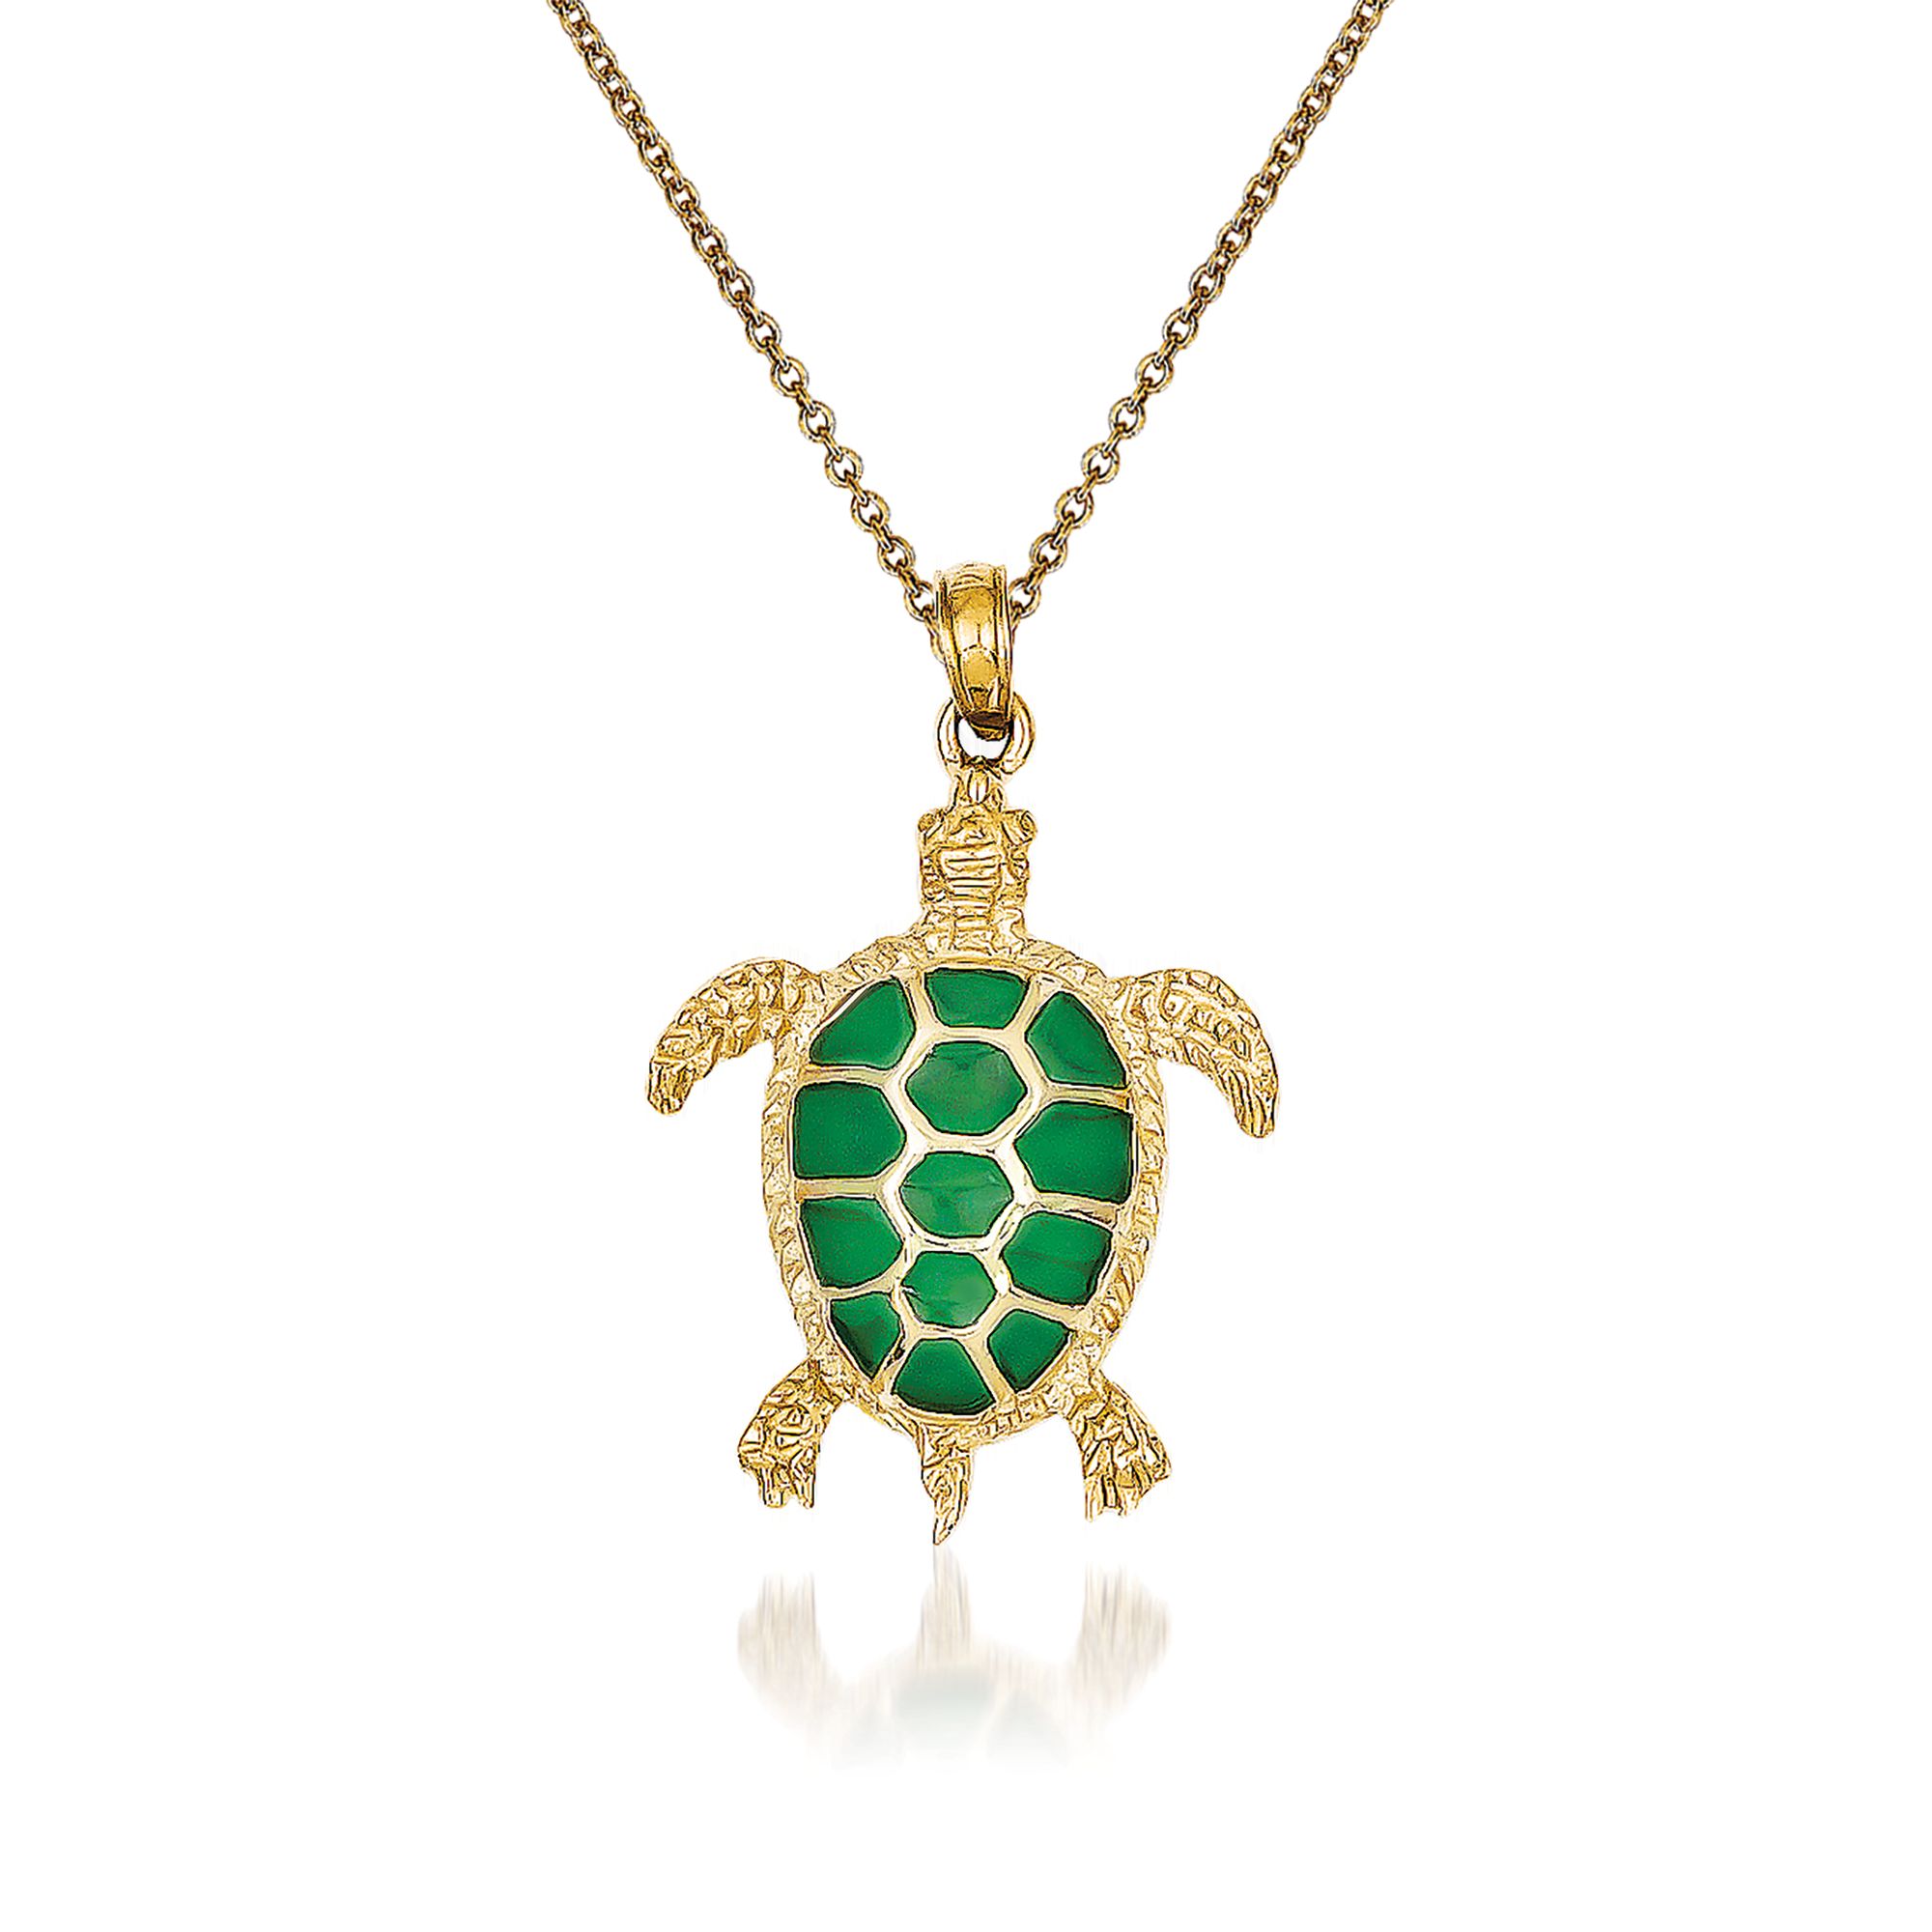 Details about   10K Yellow Gold Turtle Charm Pendant MSRP $116